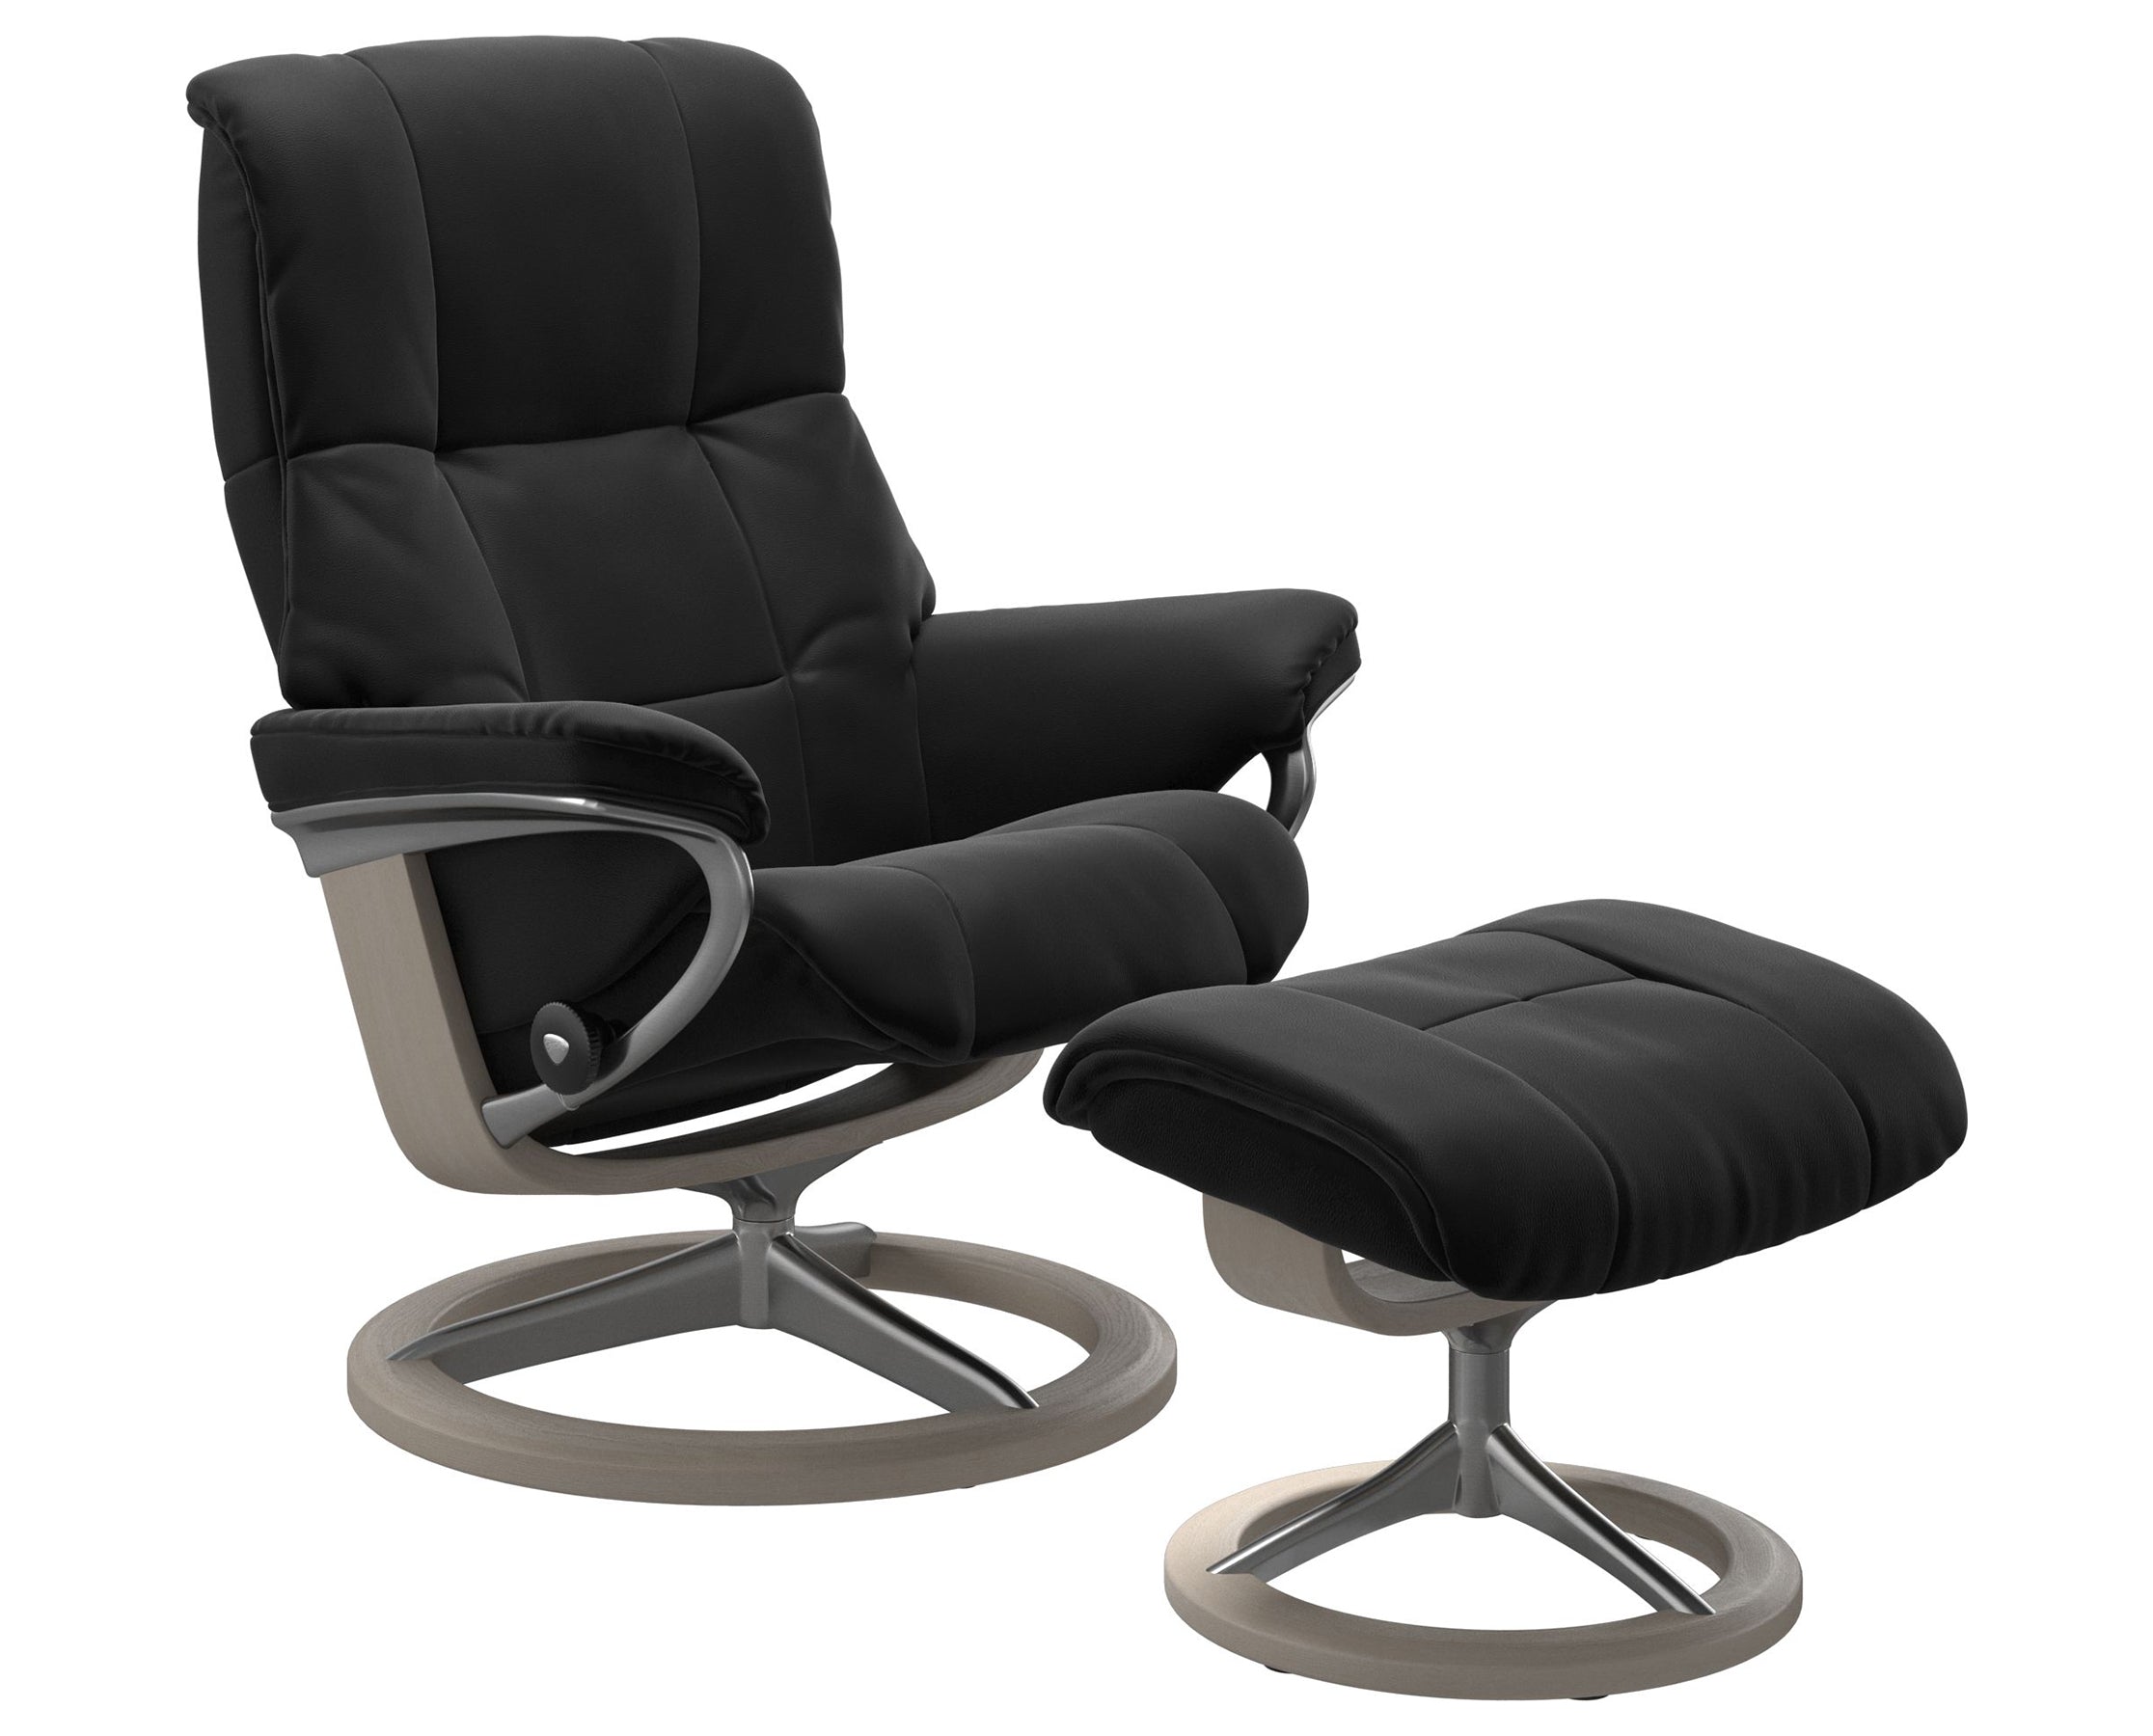 Paloma Leather Black S/M/L and Whitewash Base | Stressless Mayfair Signature Recliner | Valley Ridge Furniture